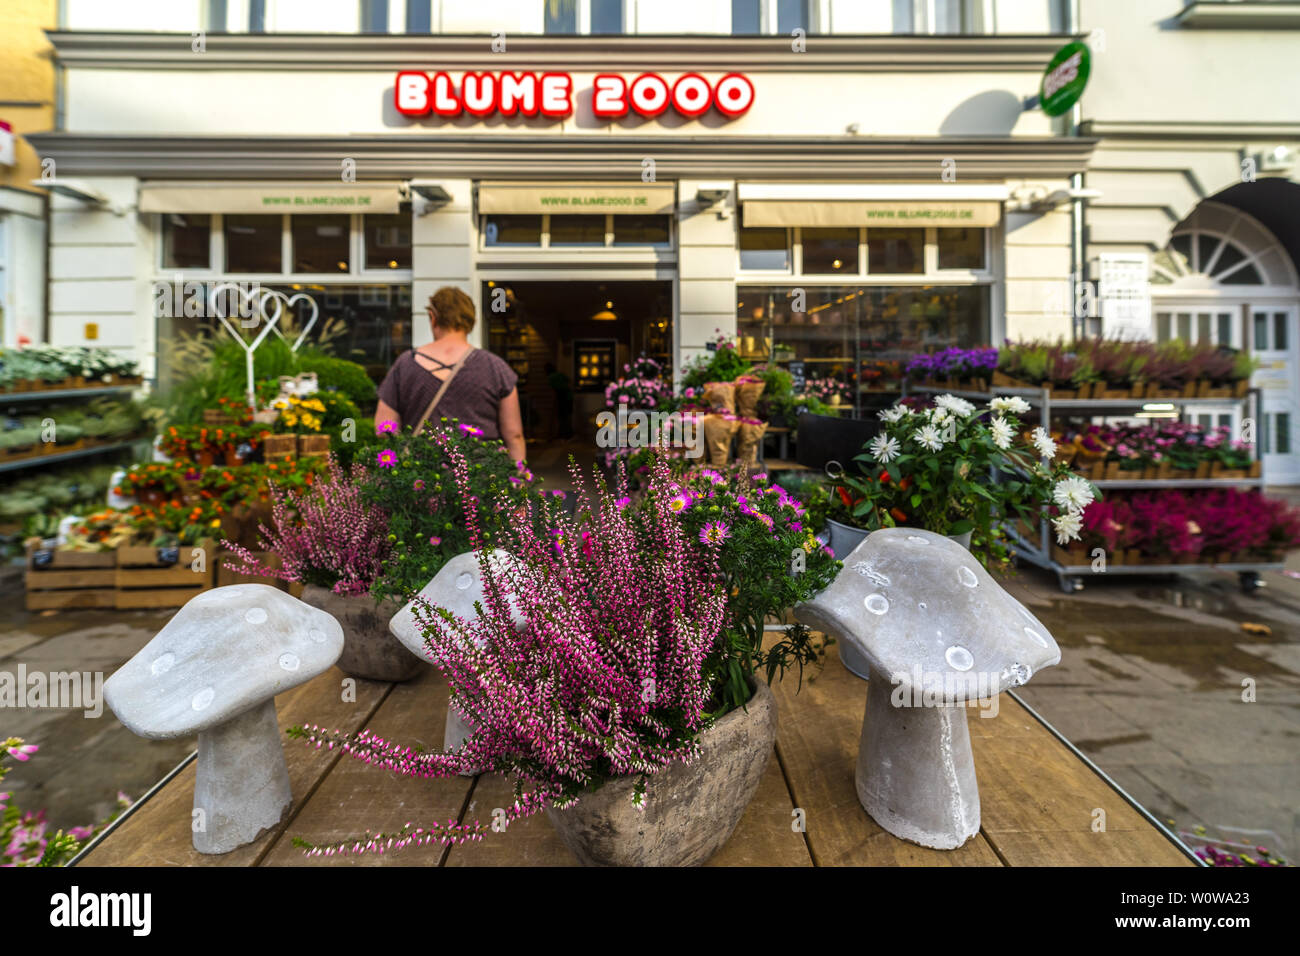 BERLIN - SEPTEMBER 09, 2018: Streets of the historic center of Altstadt  Spandau. A popular chain of flower shops Blume 2000 Stock Photo - Alamy